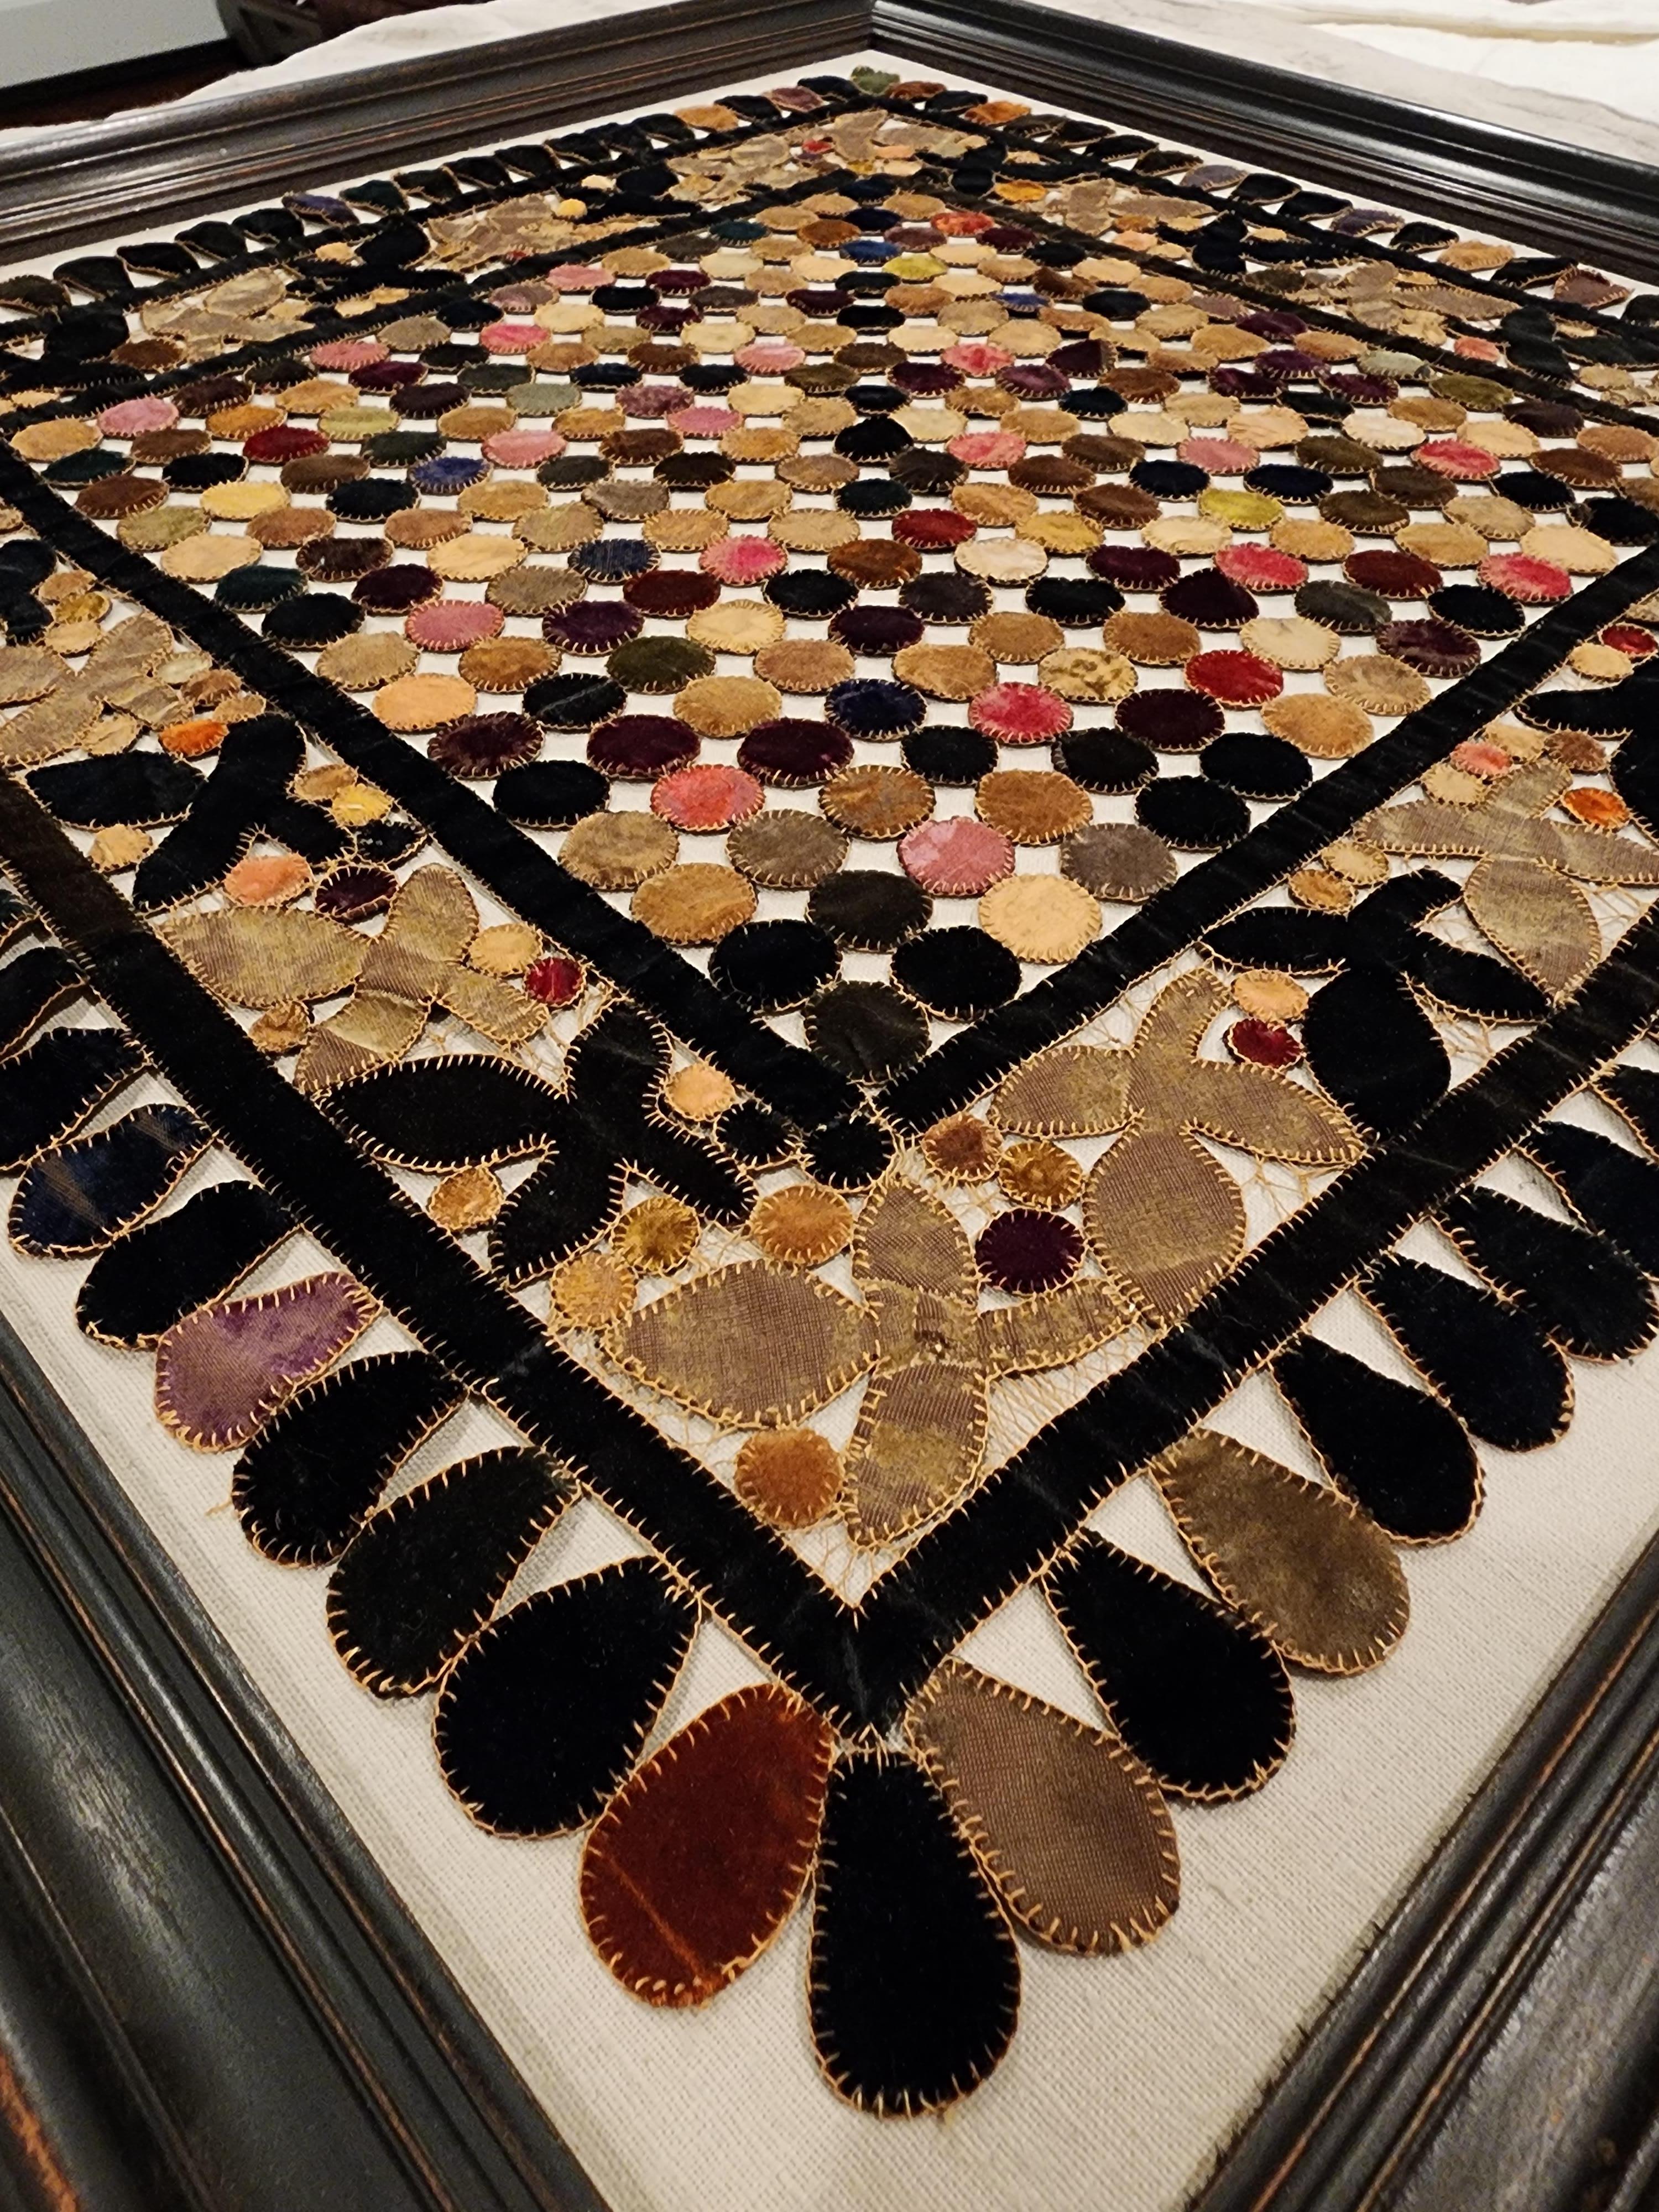 19th Century American Penny Table Rug  1